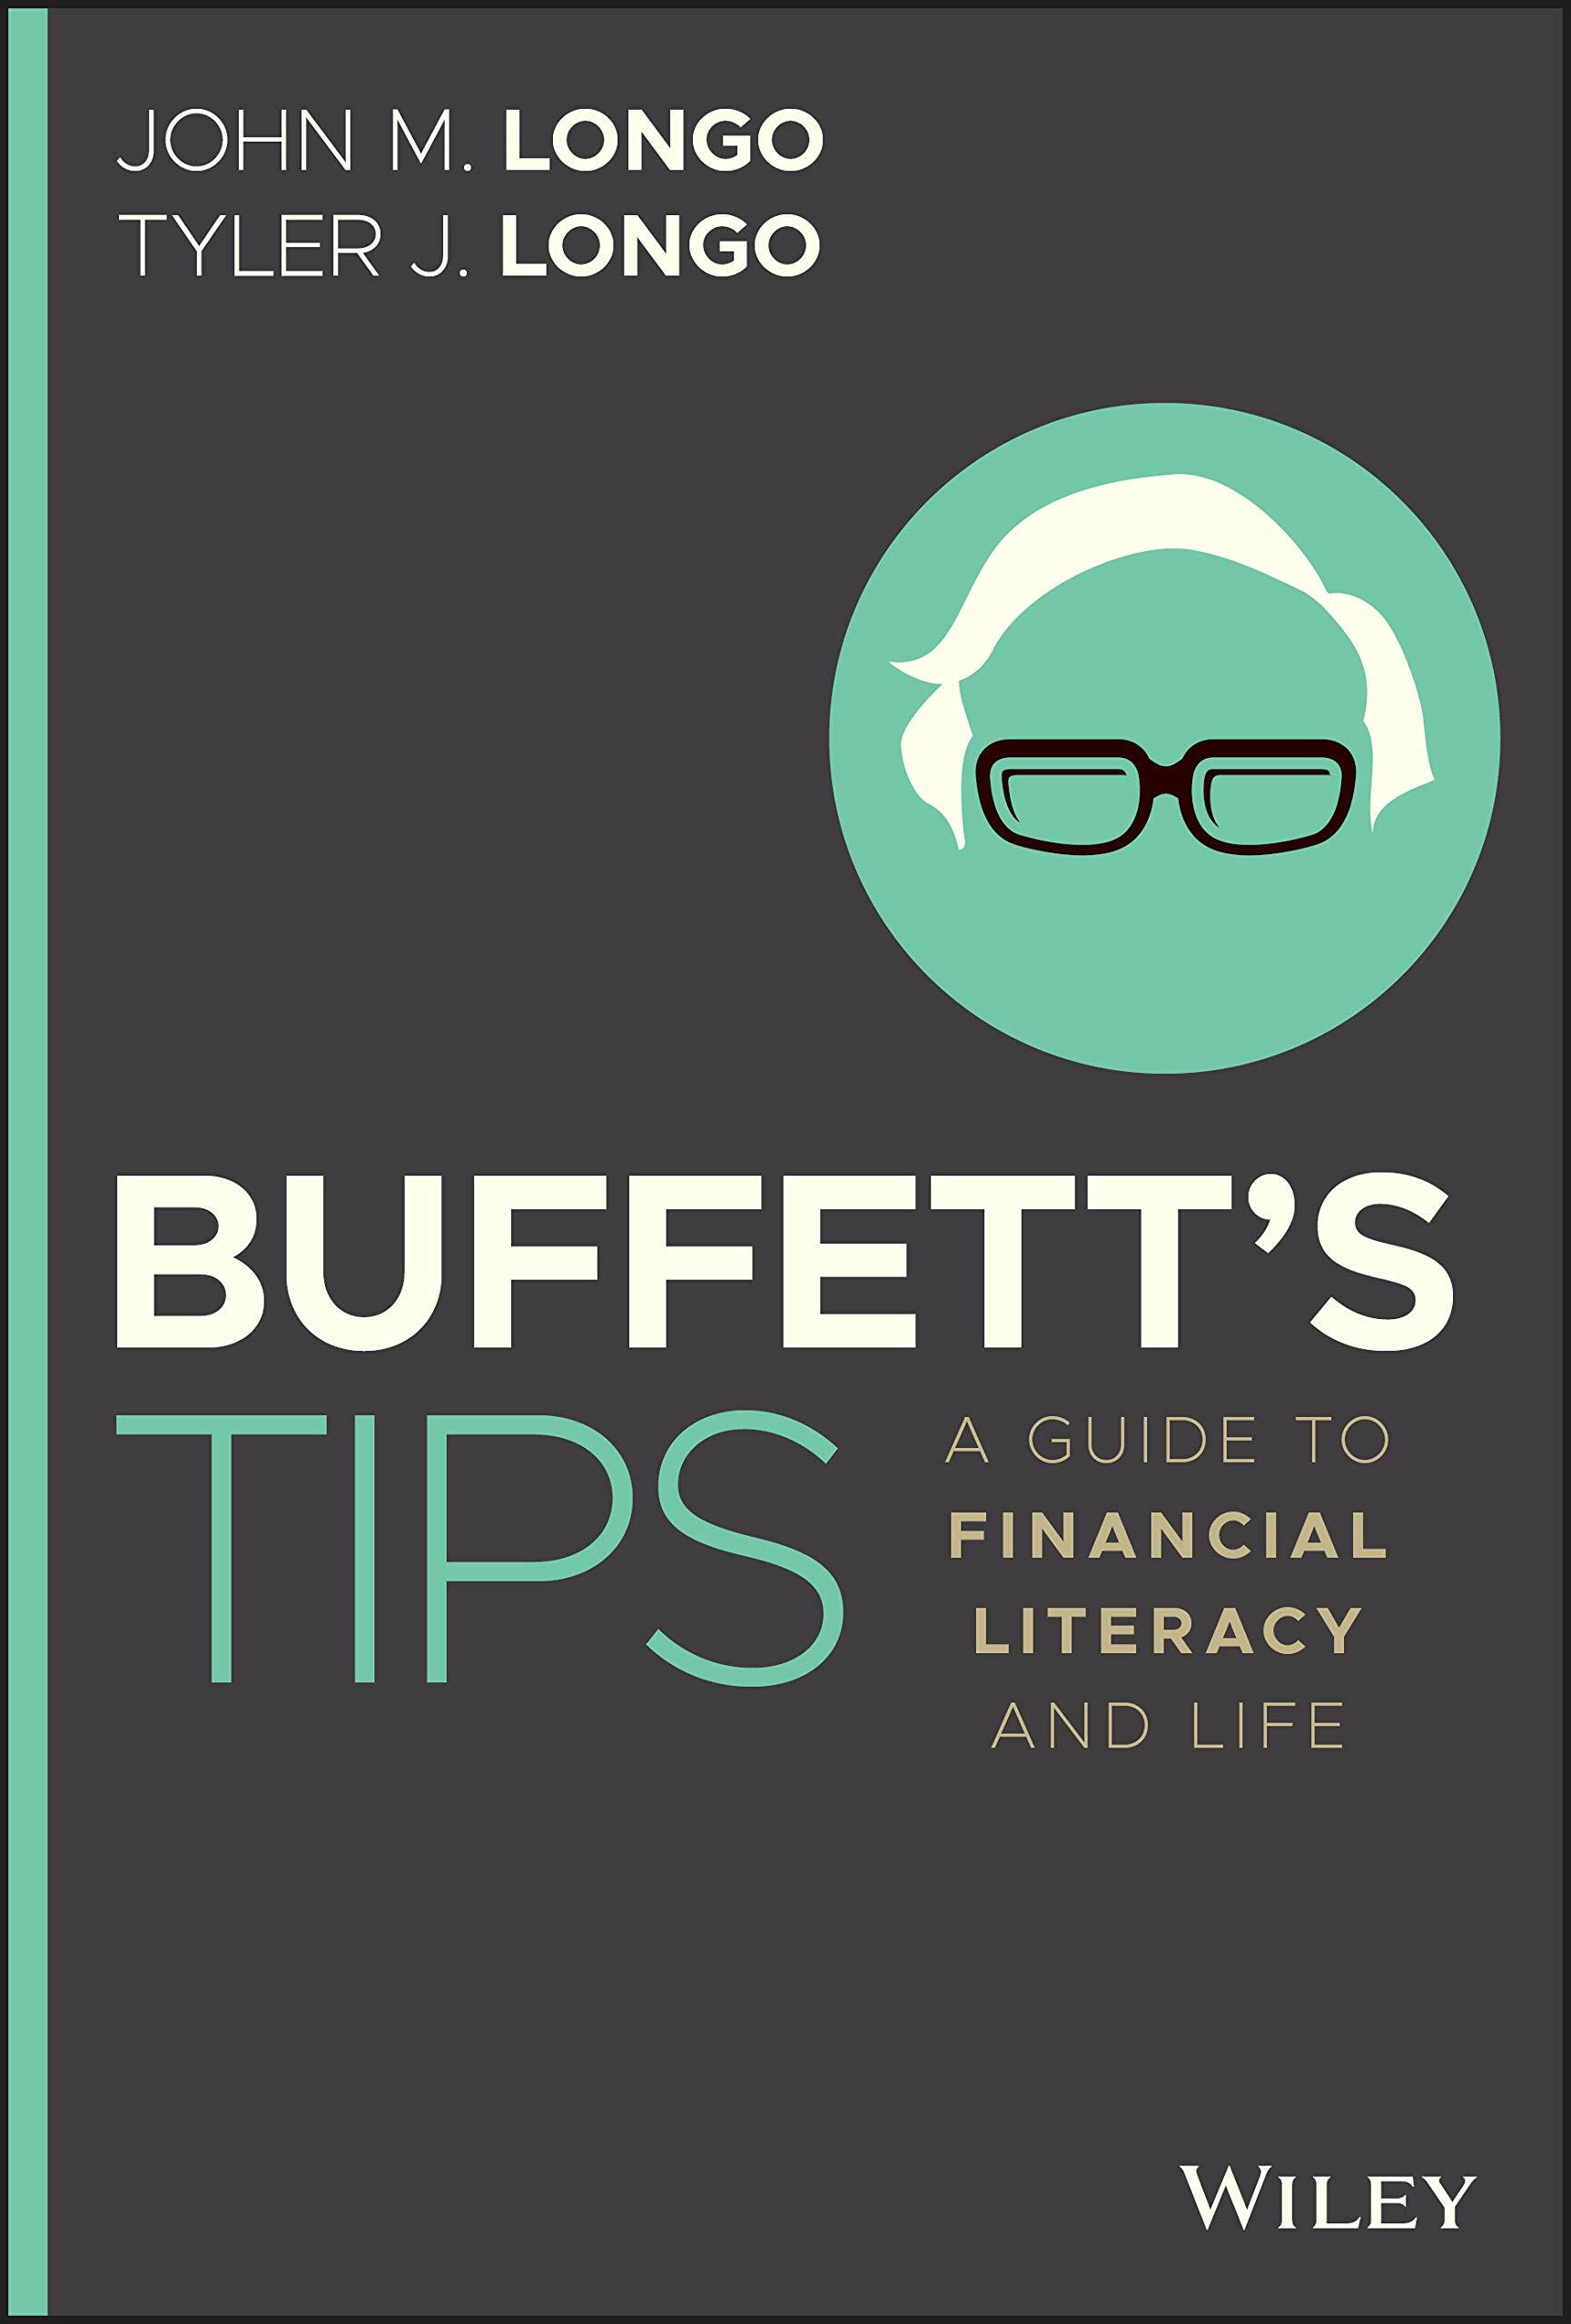 Buffetts Tips: A Guide to Financial Literacy and Life (Hardcover)